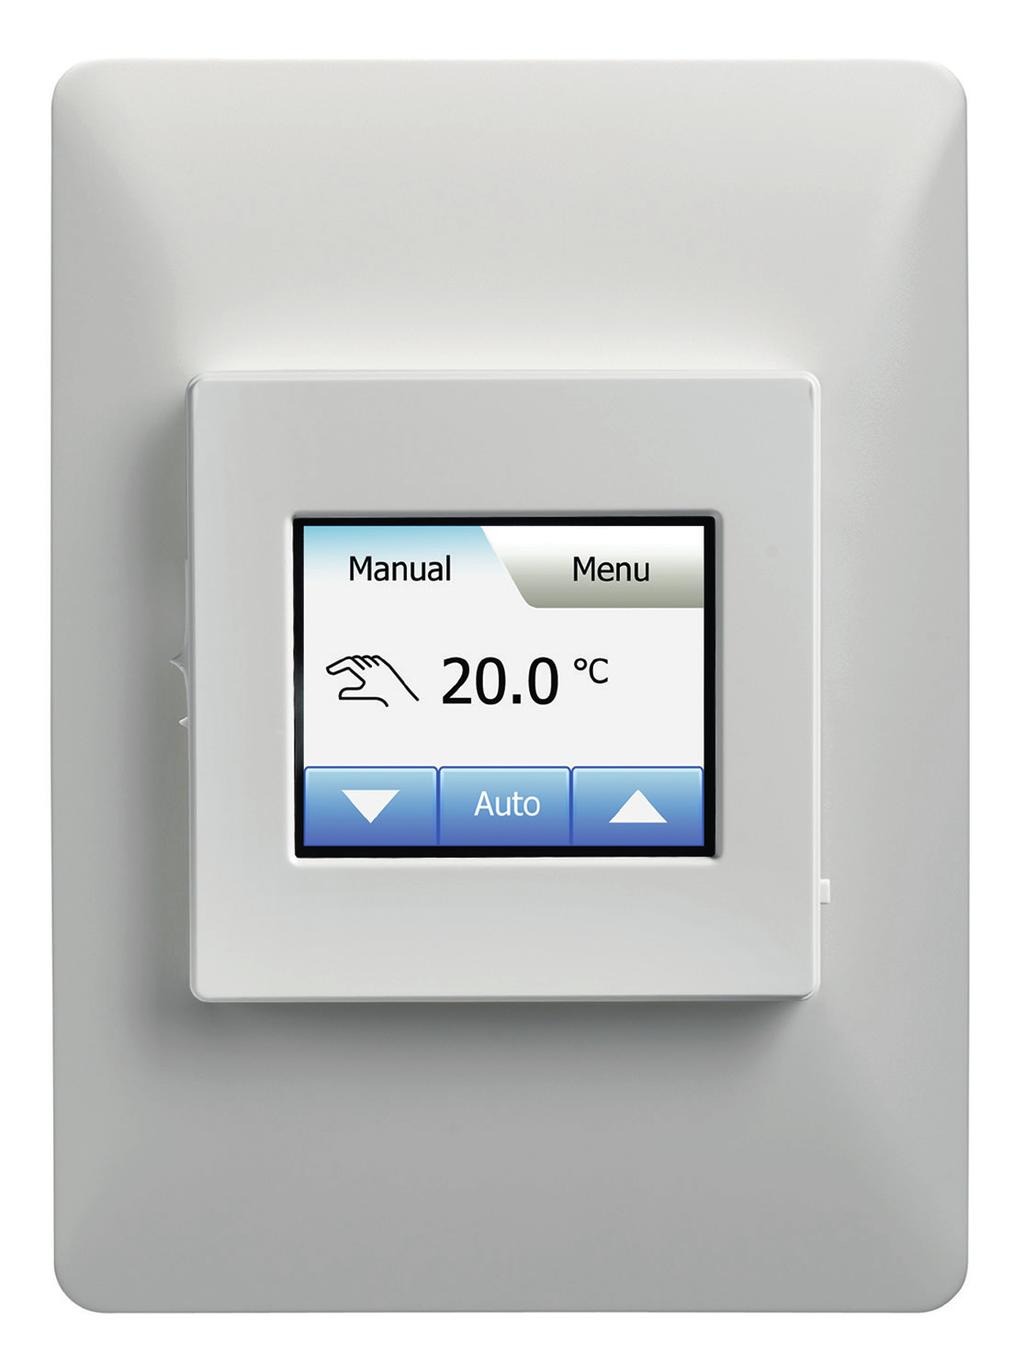 Warmup Touch Warmup thermostats are constructed using high quality components and have been selected for their ease of use, functionality and good looks... WWW.WARMUP.CO.